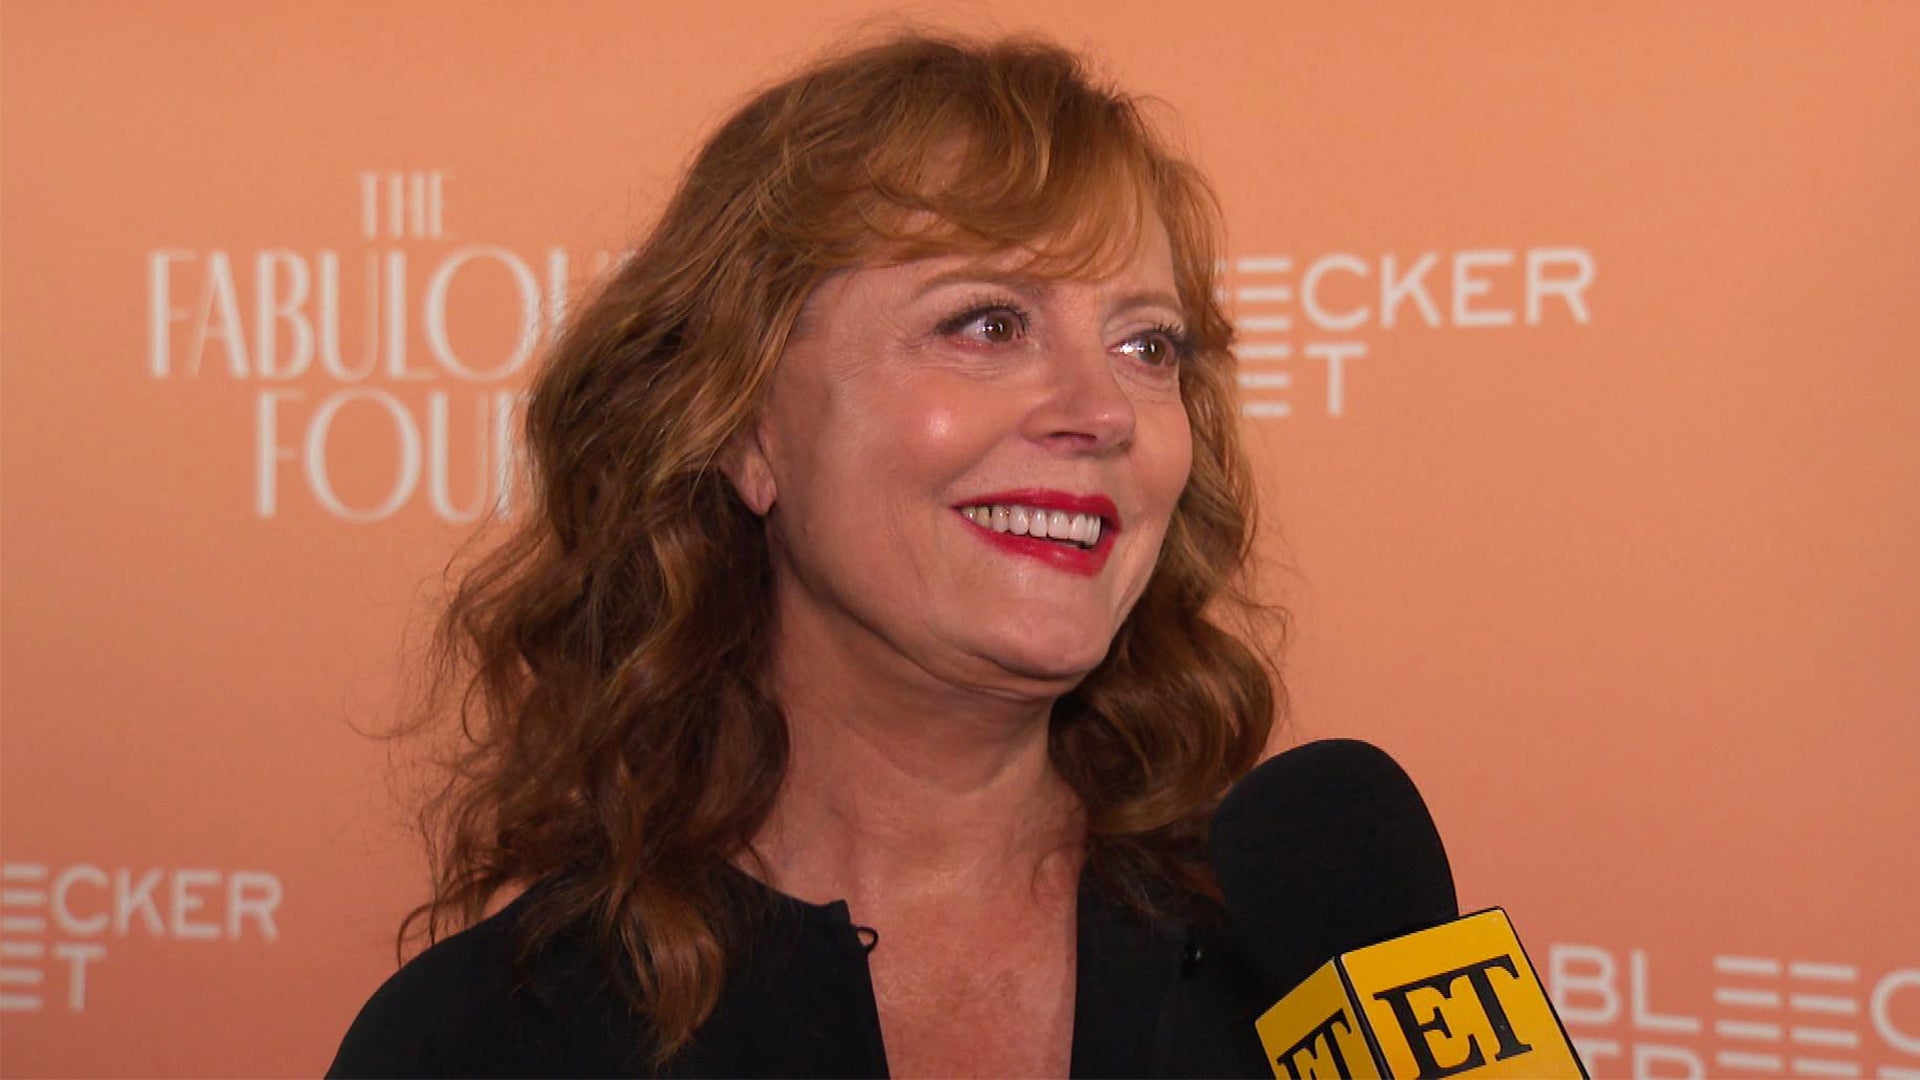 Susan Sarandon Subtly Shades Exes as She Embraces Finding Love Again (Exclusive)